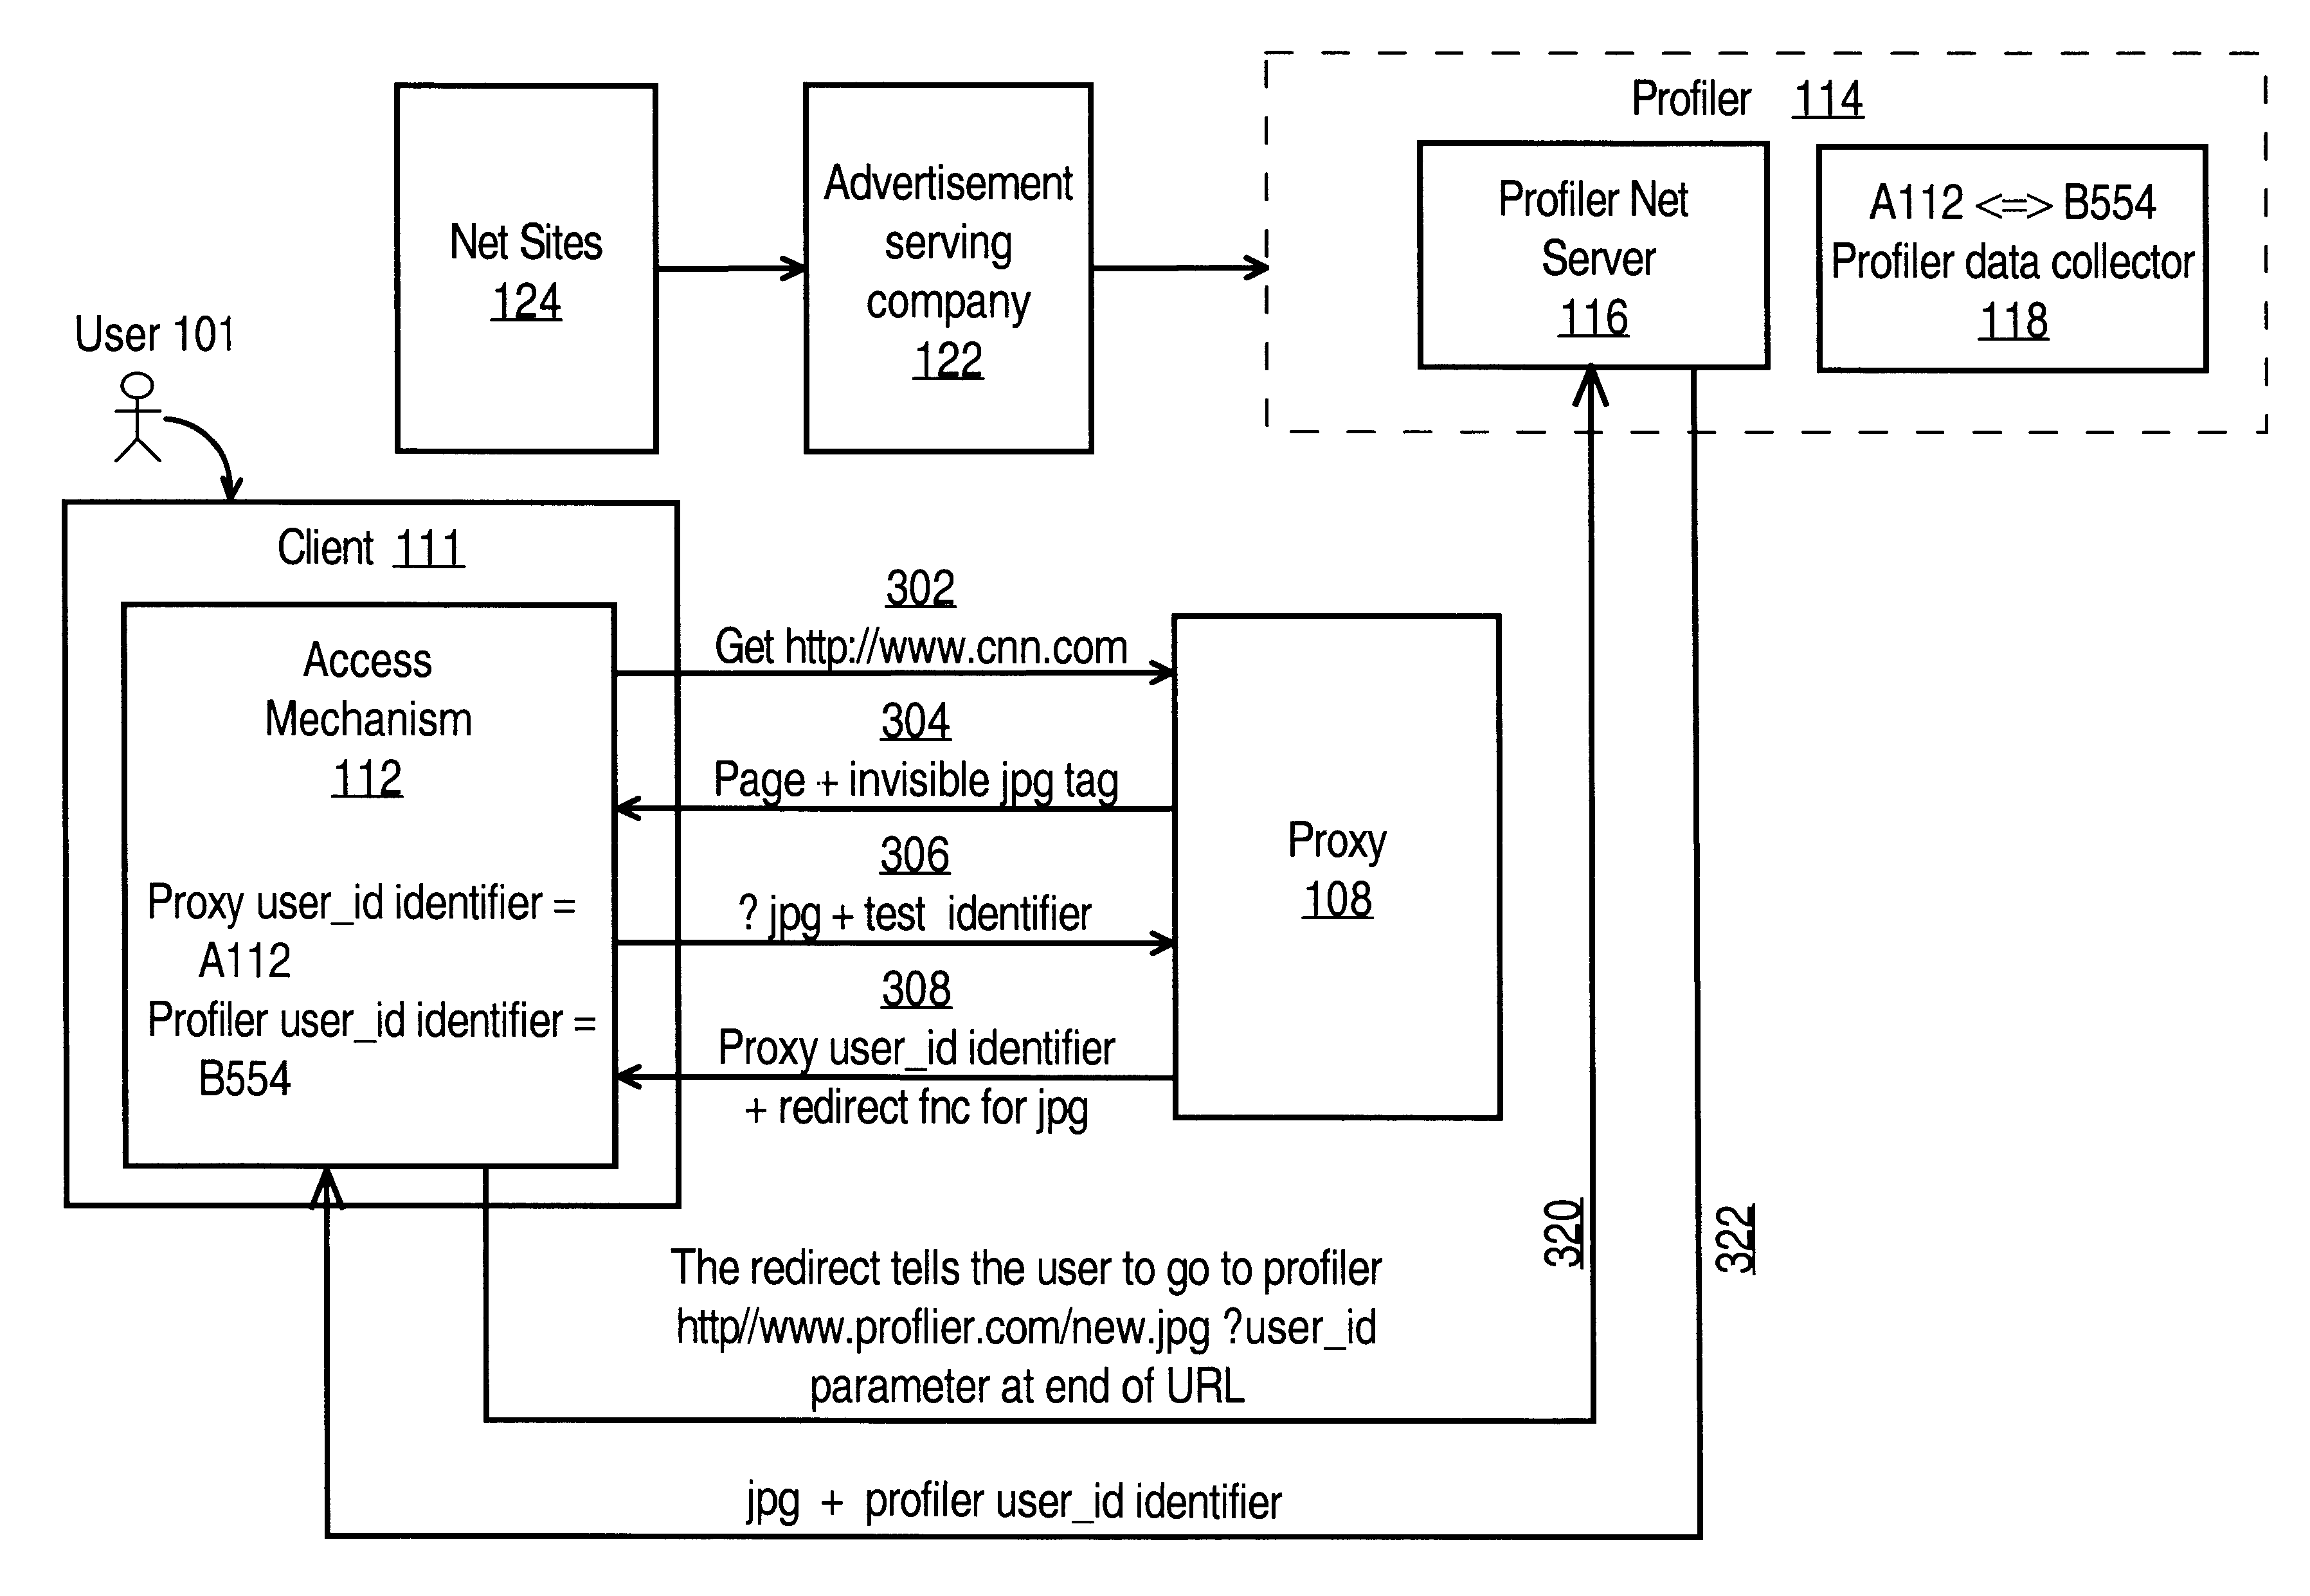 Method of creating data streams for user-specific usage data gathering systems